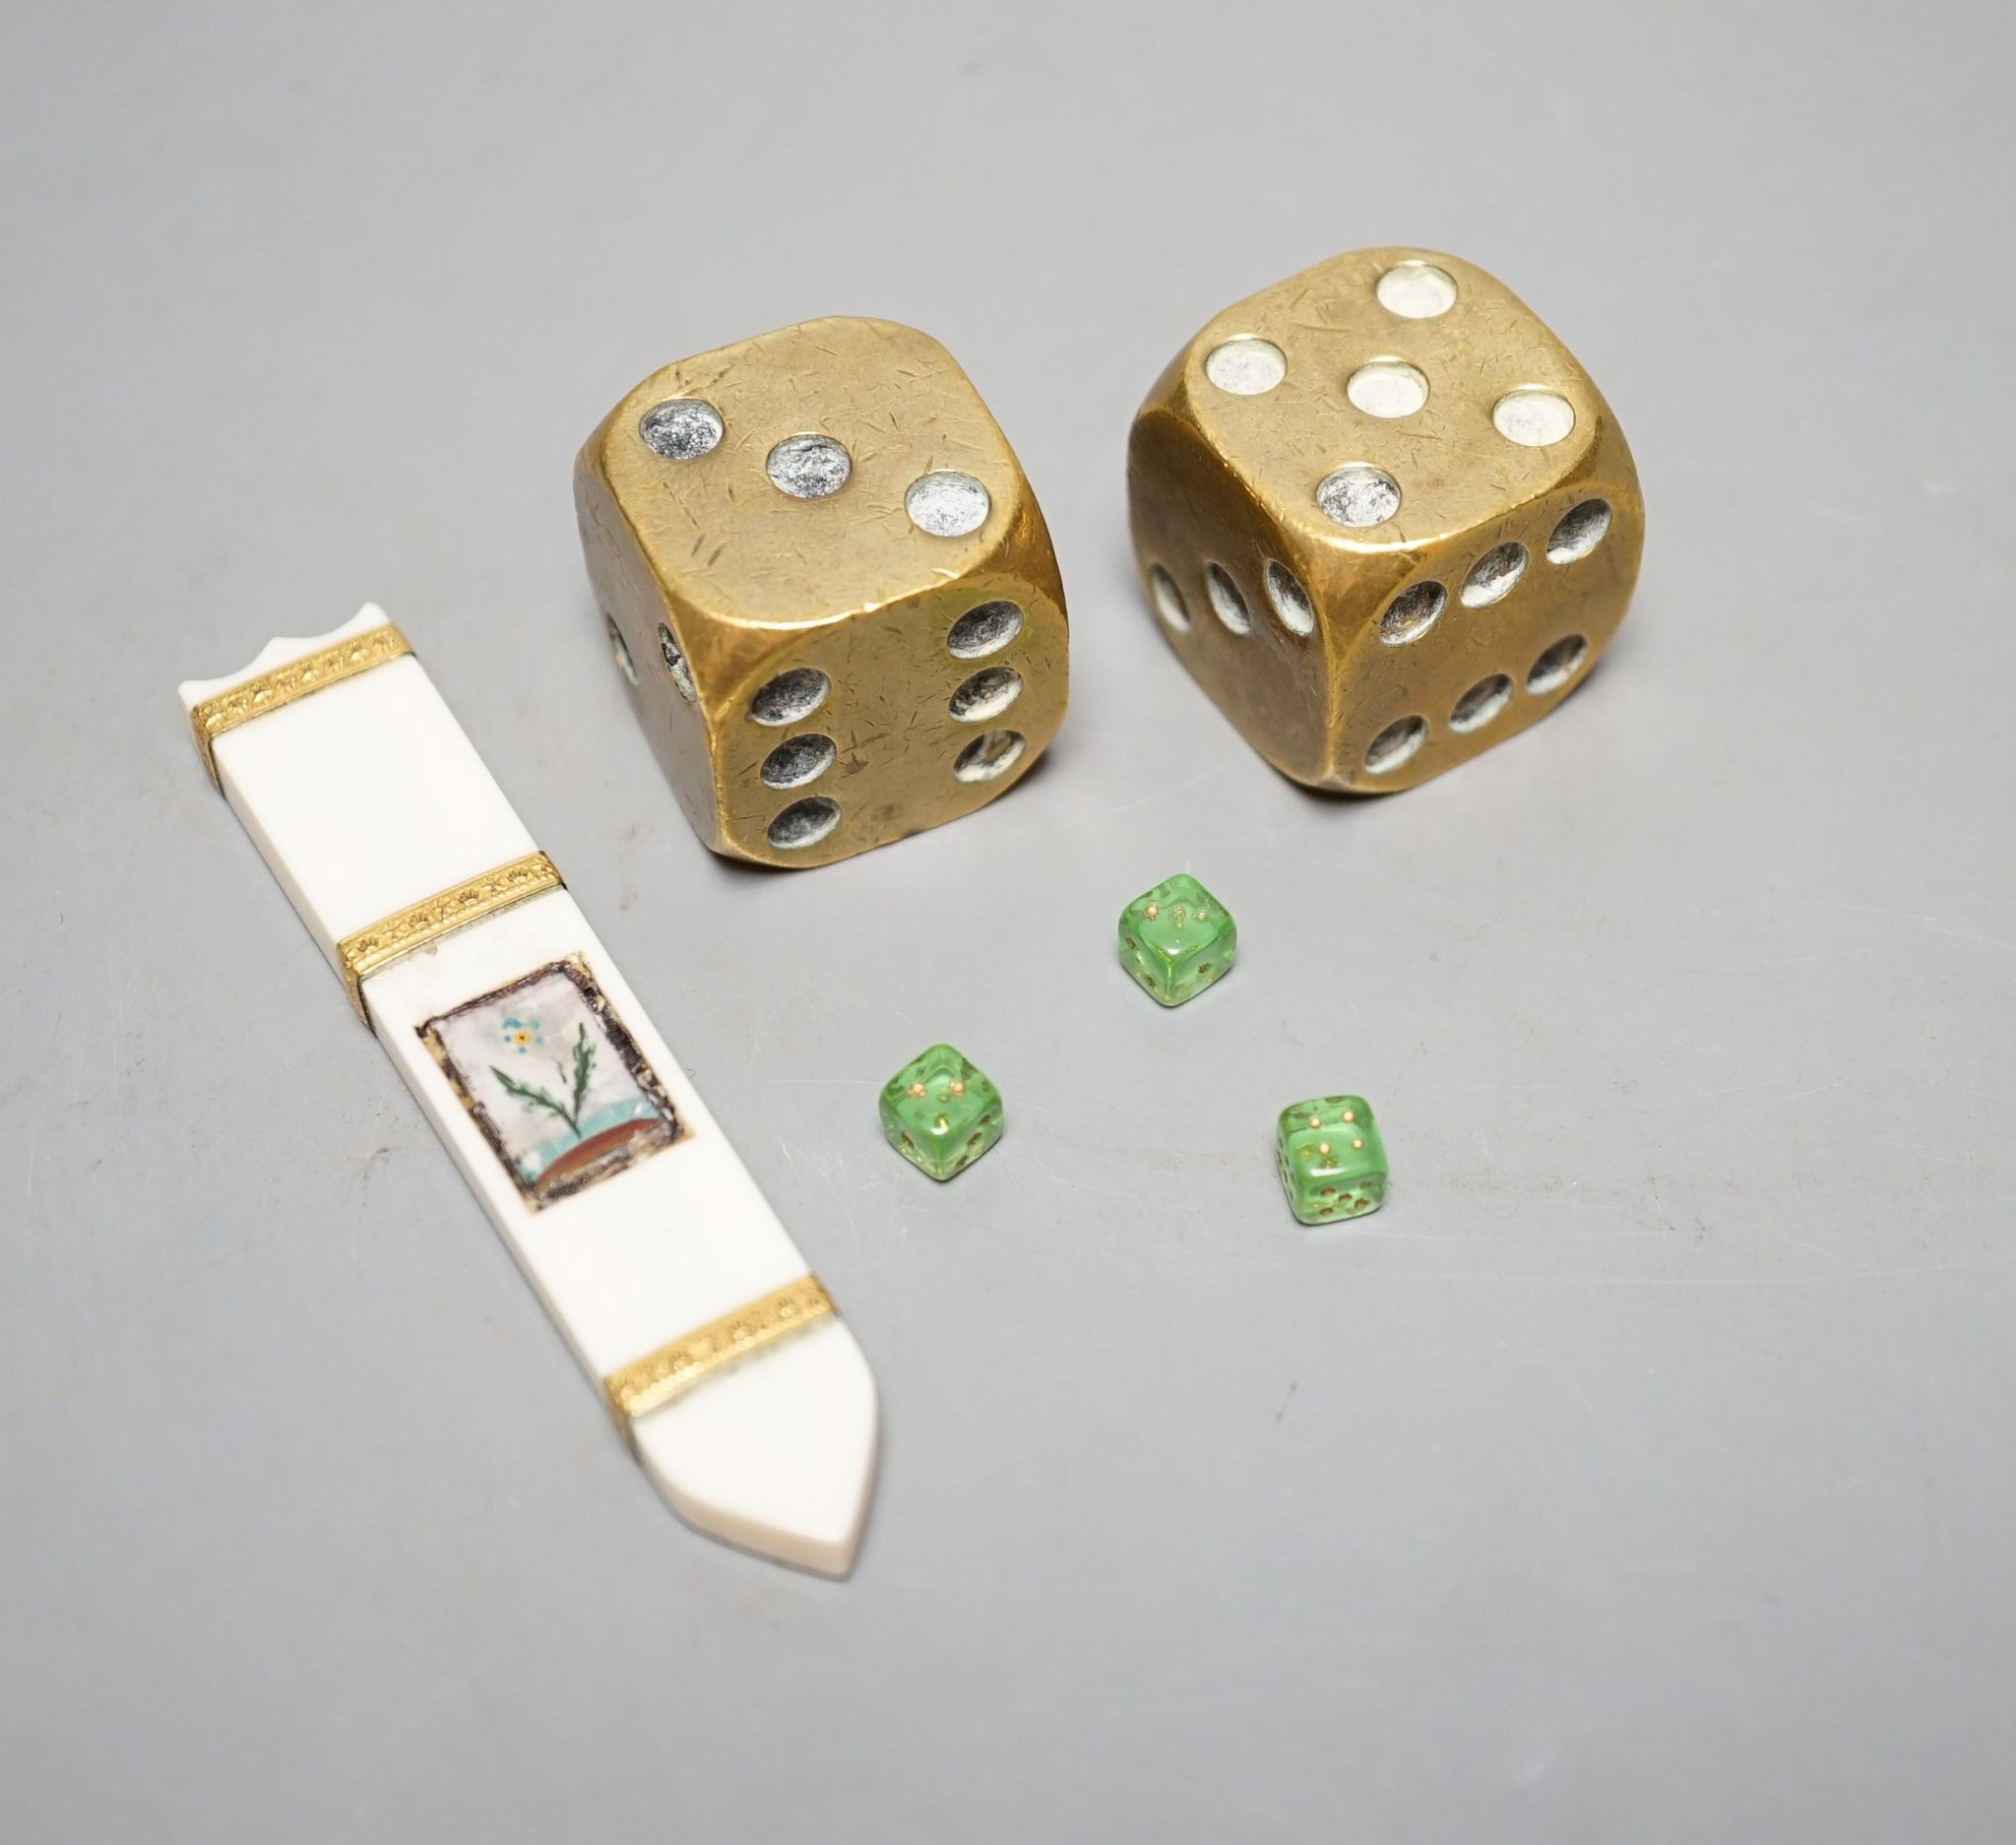 A late 18th century ivory and gold mounted needle case, two brass dice and three mini dice